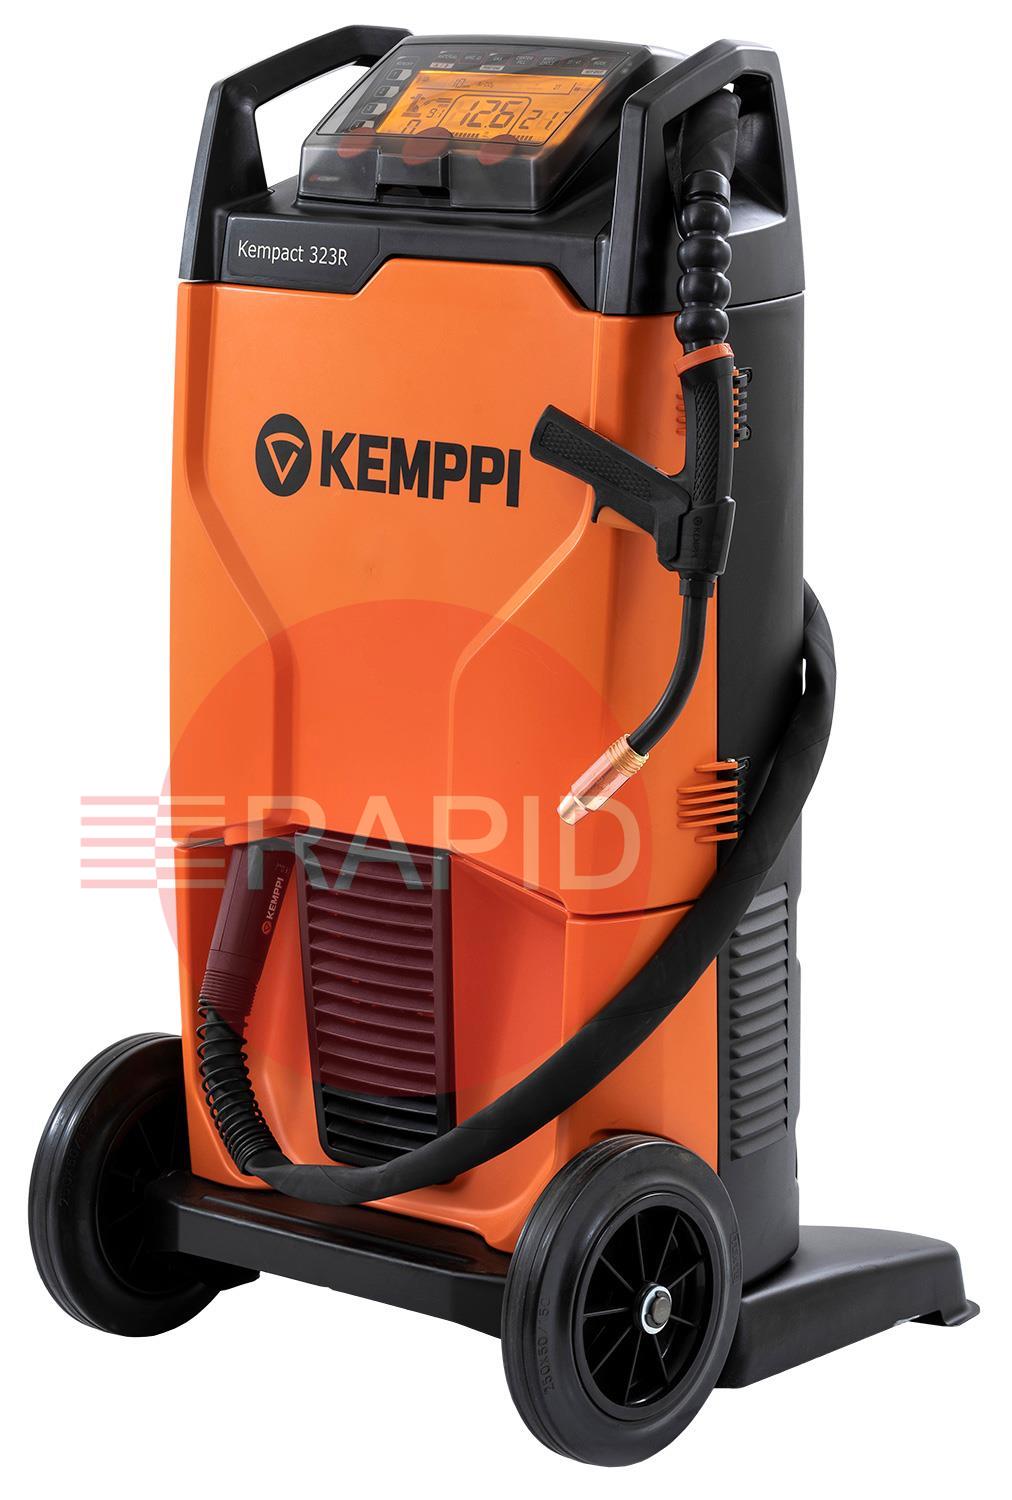 P2274GXE  Kemppi Kempact RA 323R, 320A 3 Phase 400v Mig Welder, with Flexlite GXe 205G 5.0m Torch